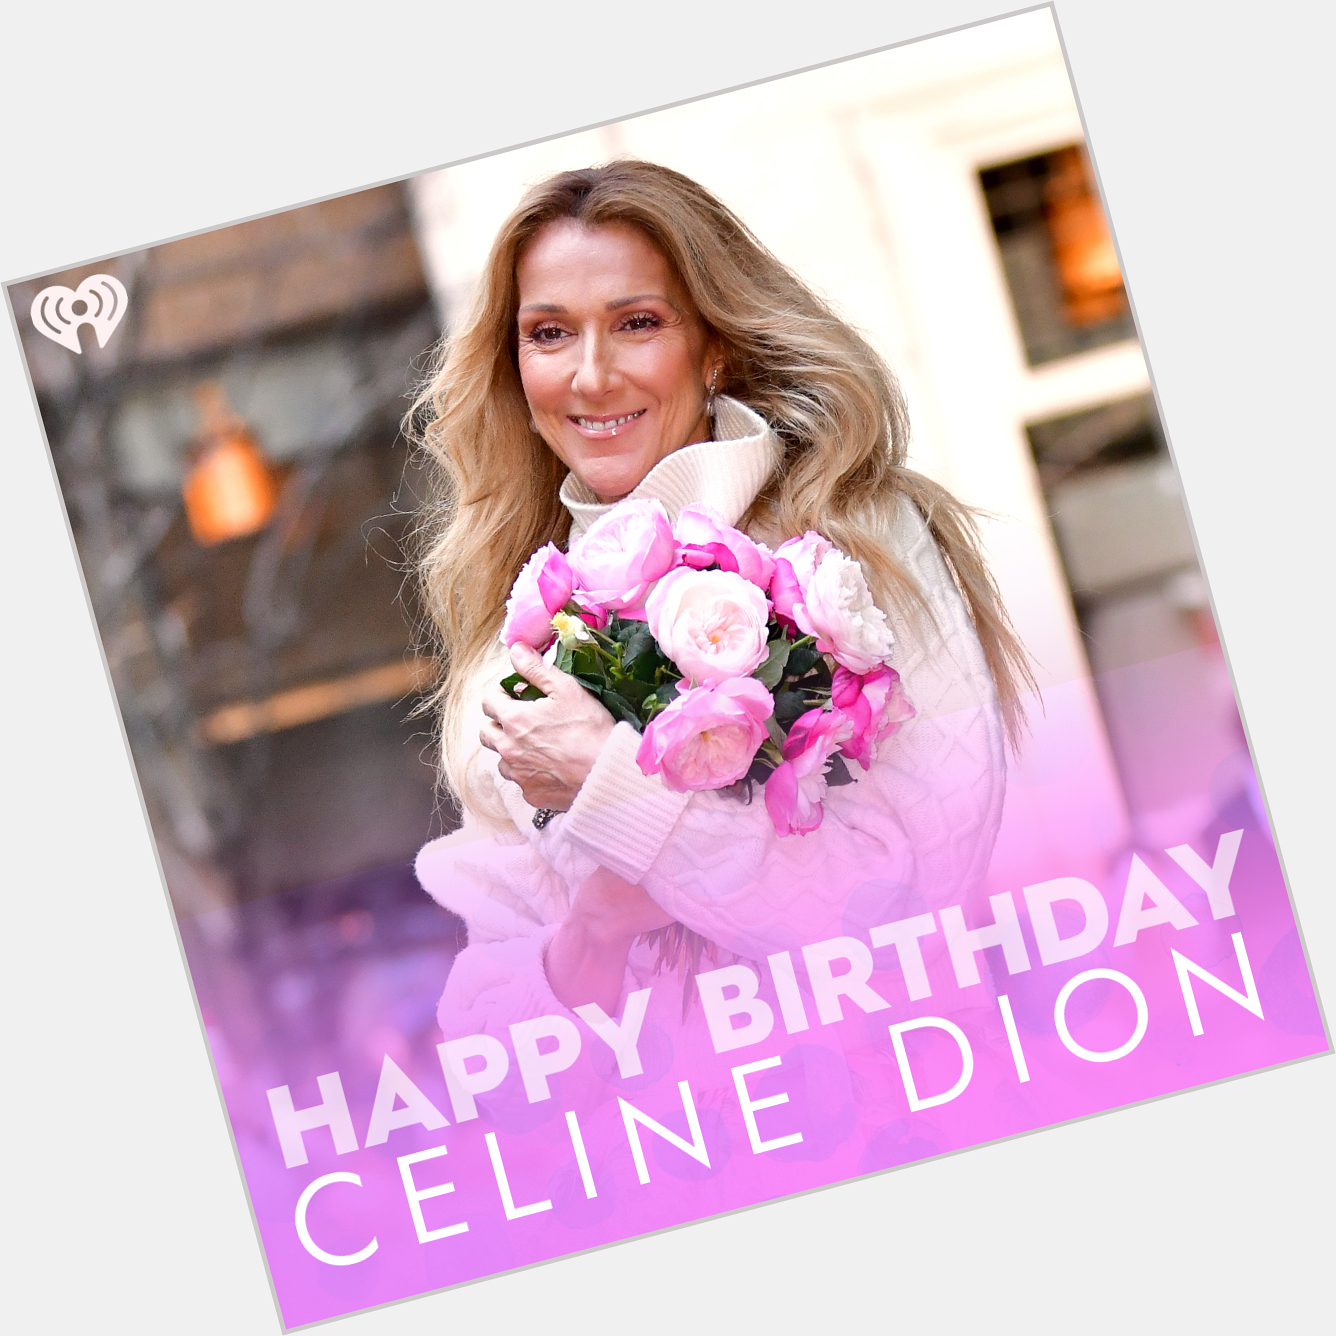 Happy Birthday to the one and only, Céline Dion! 

Celebrating this icon today and everyday  